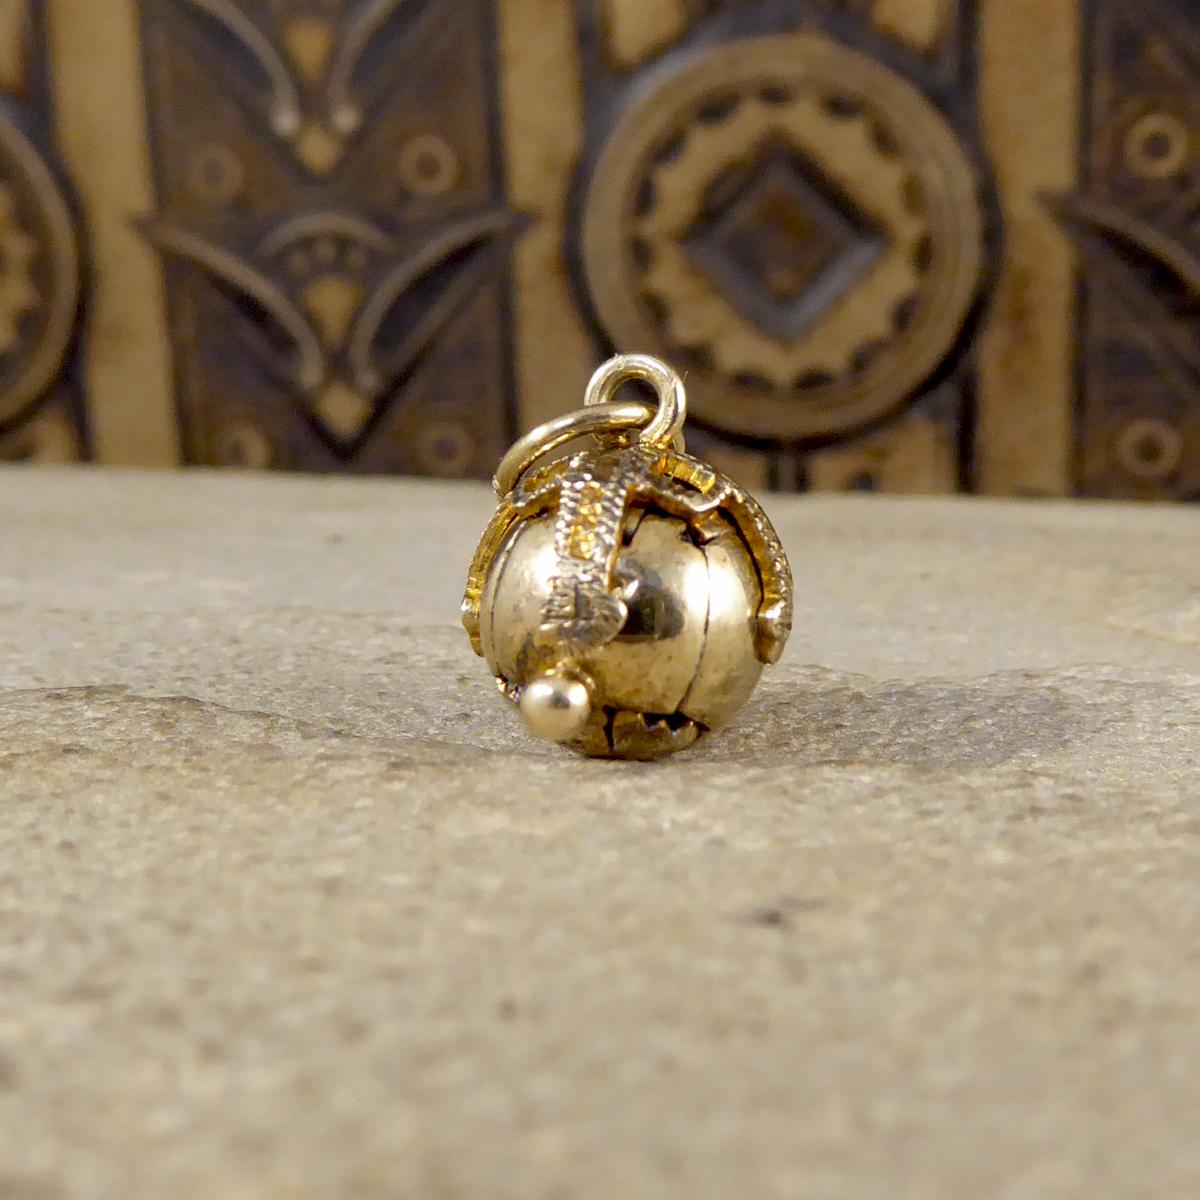 This vintage mini folding orb pendant appears initially to simply be a Gold sphere, however the four hinged arms open to show a cross shape formed by six pyramids. On these, are a variety of symbols including the tools of stonemasons to represent